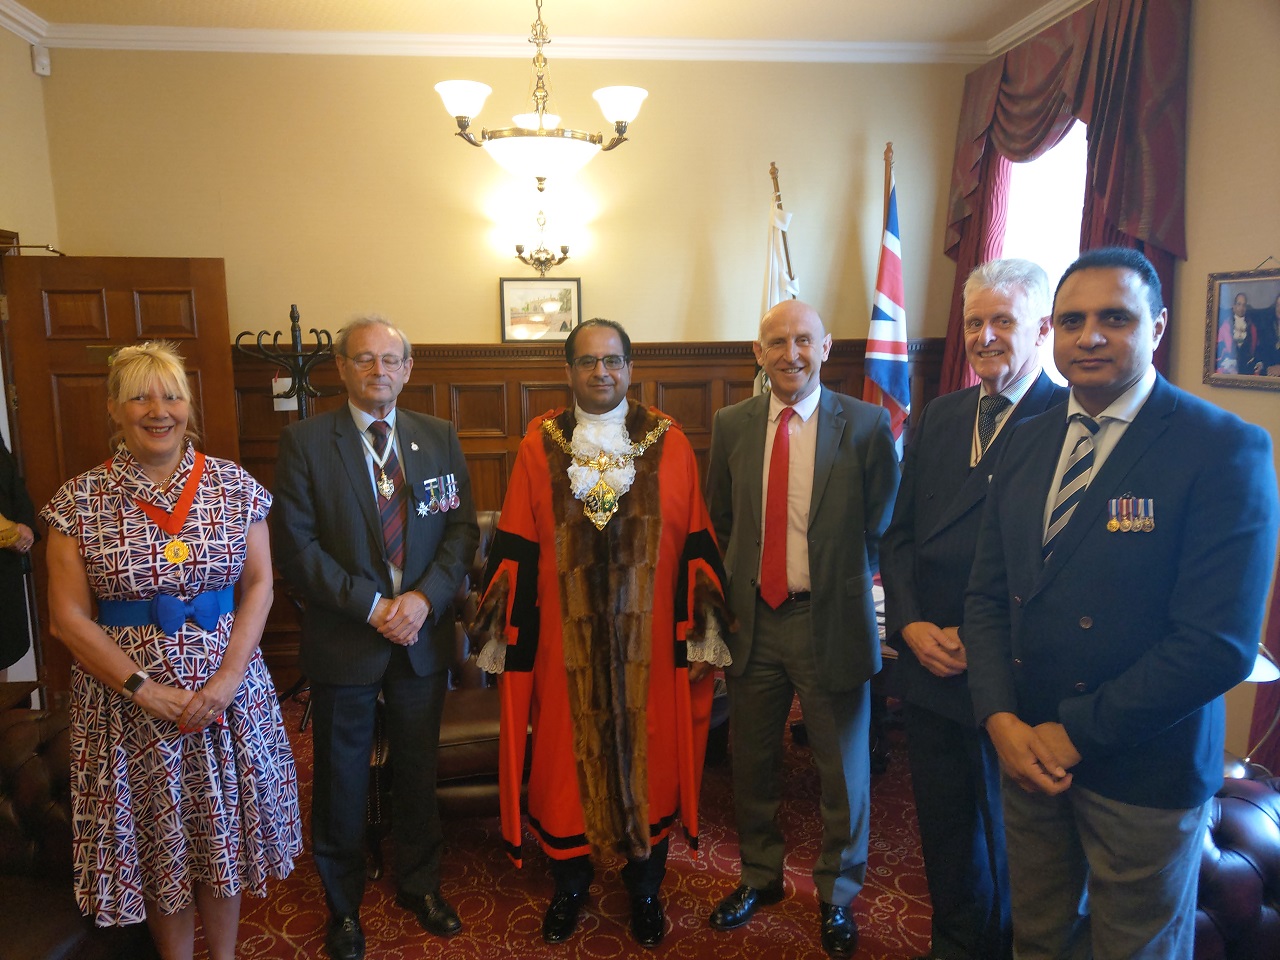 The Mayor and dignitaries inside the Town Hall